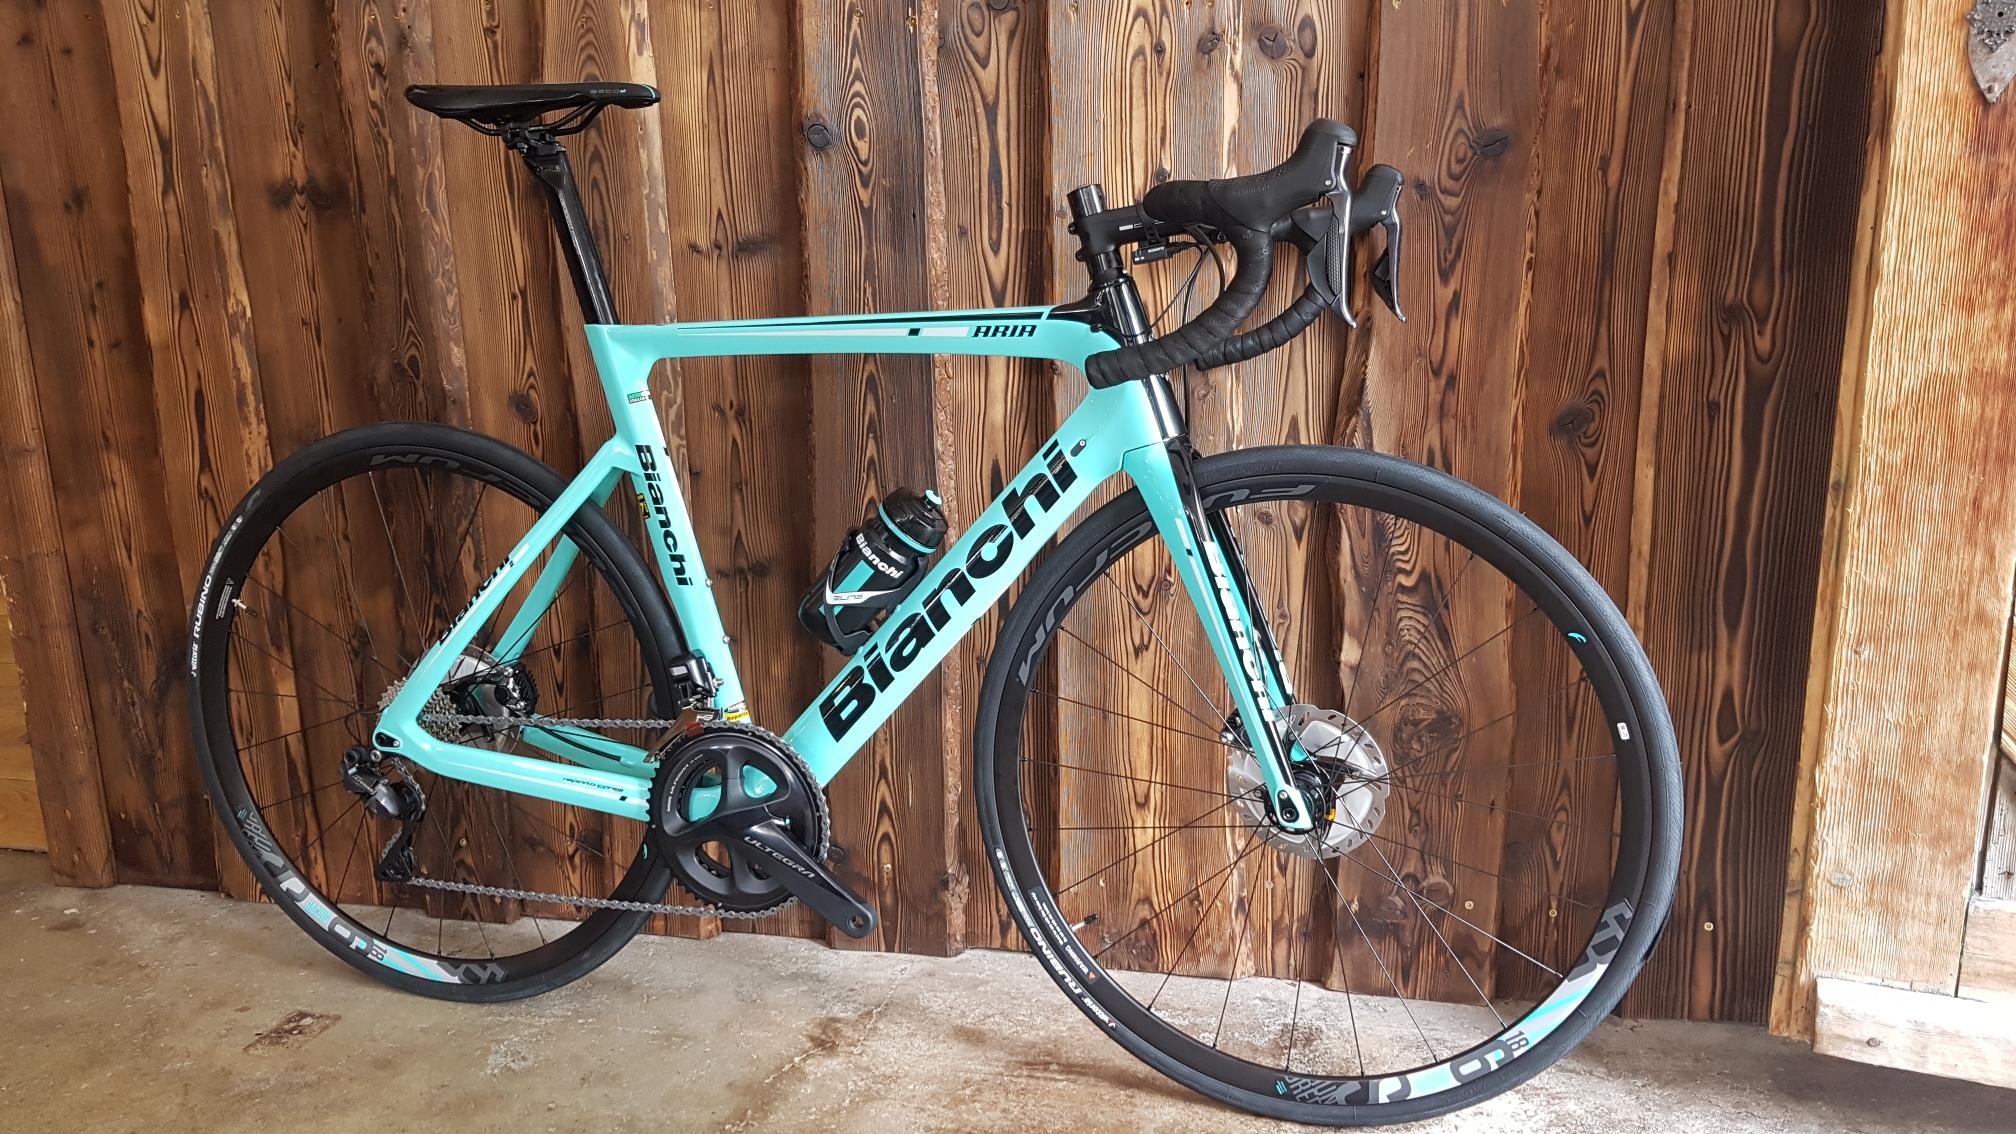 Bianchi Aria Ultegra Disc / Bianchi Aria Disc Shimano Ultegra Di2 2019 - Evolution Bikes - The aria disc feels as manoeuvrable as the rim brake version, which isn't a surprise given that the geometry is virtually identical (i'll tell you more this isn't a direct competitor to the bianchi, though, despite having an ultegra groupset and disc brakes, because it's an endurance bike as opposed to.